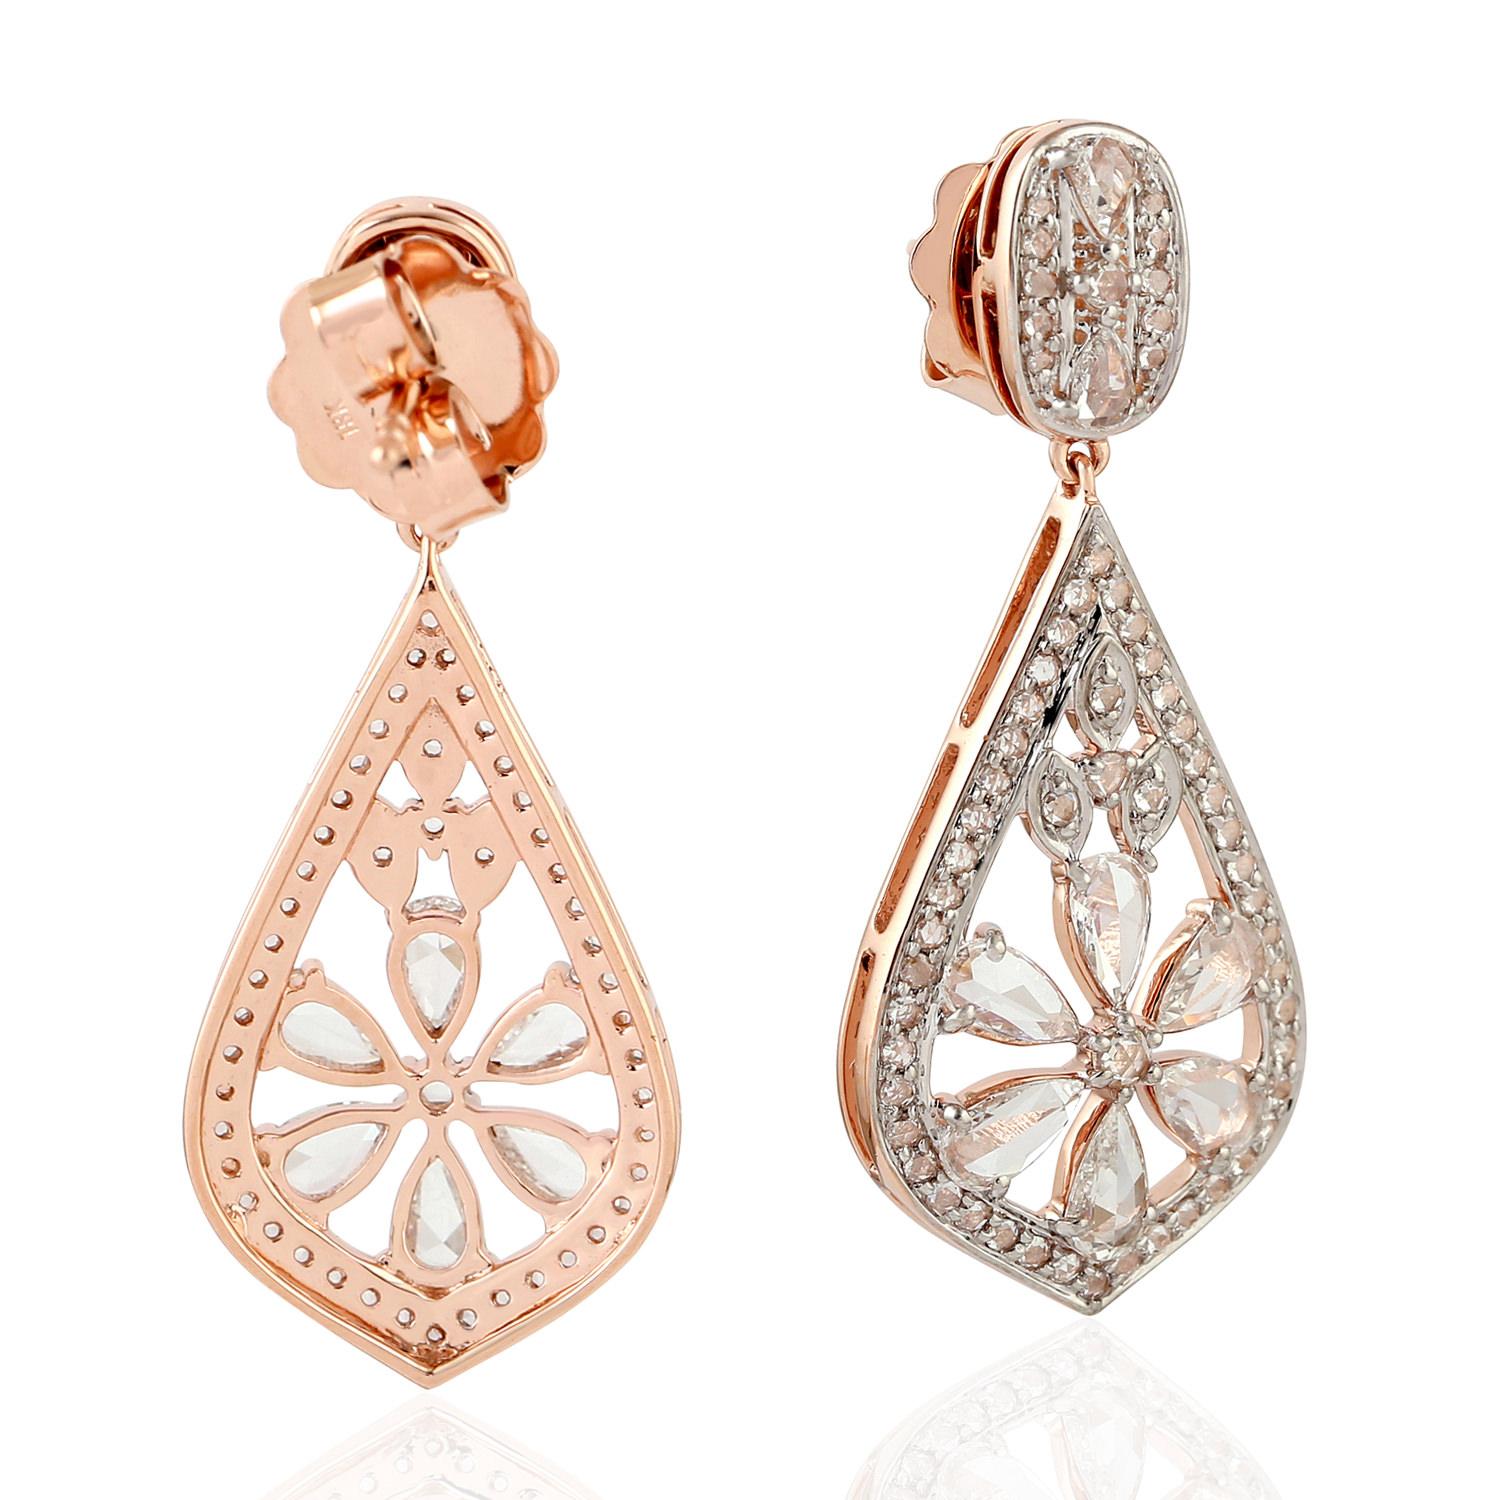 These beautiful drop earrings are handmade in 18-karat gold and set with 2.07 carats of rose cut diamonds. 

FOLLOW  MEGHNA JEWELS storefront to view the latest collection & exclusive pieces.  Meghna Jewels is proudly rated as a Top Seller on